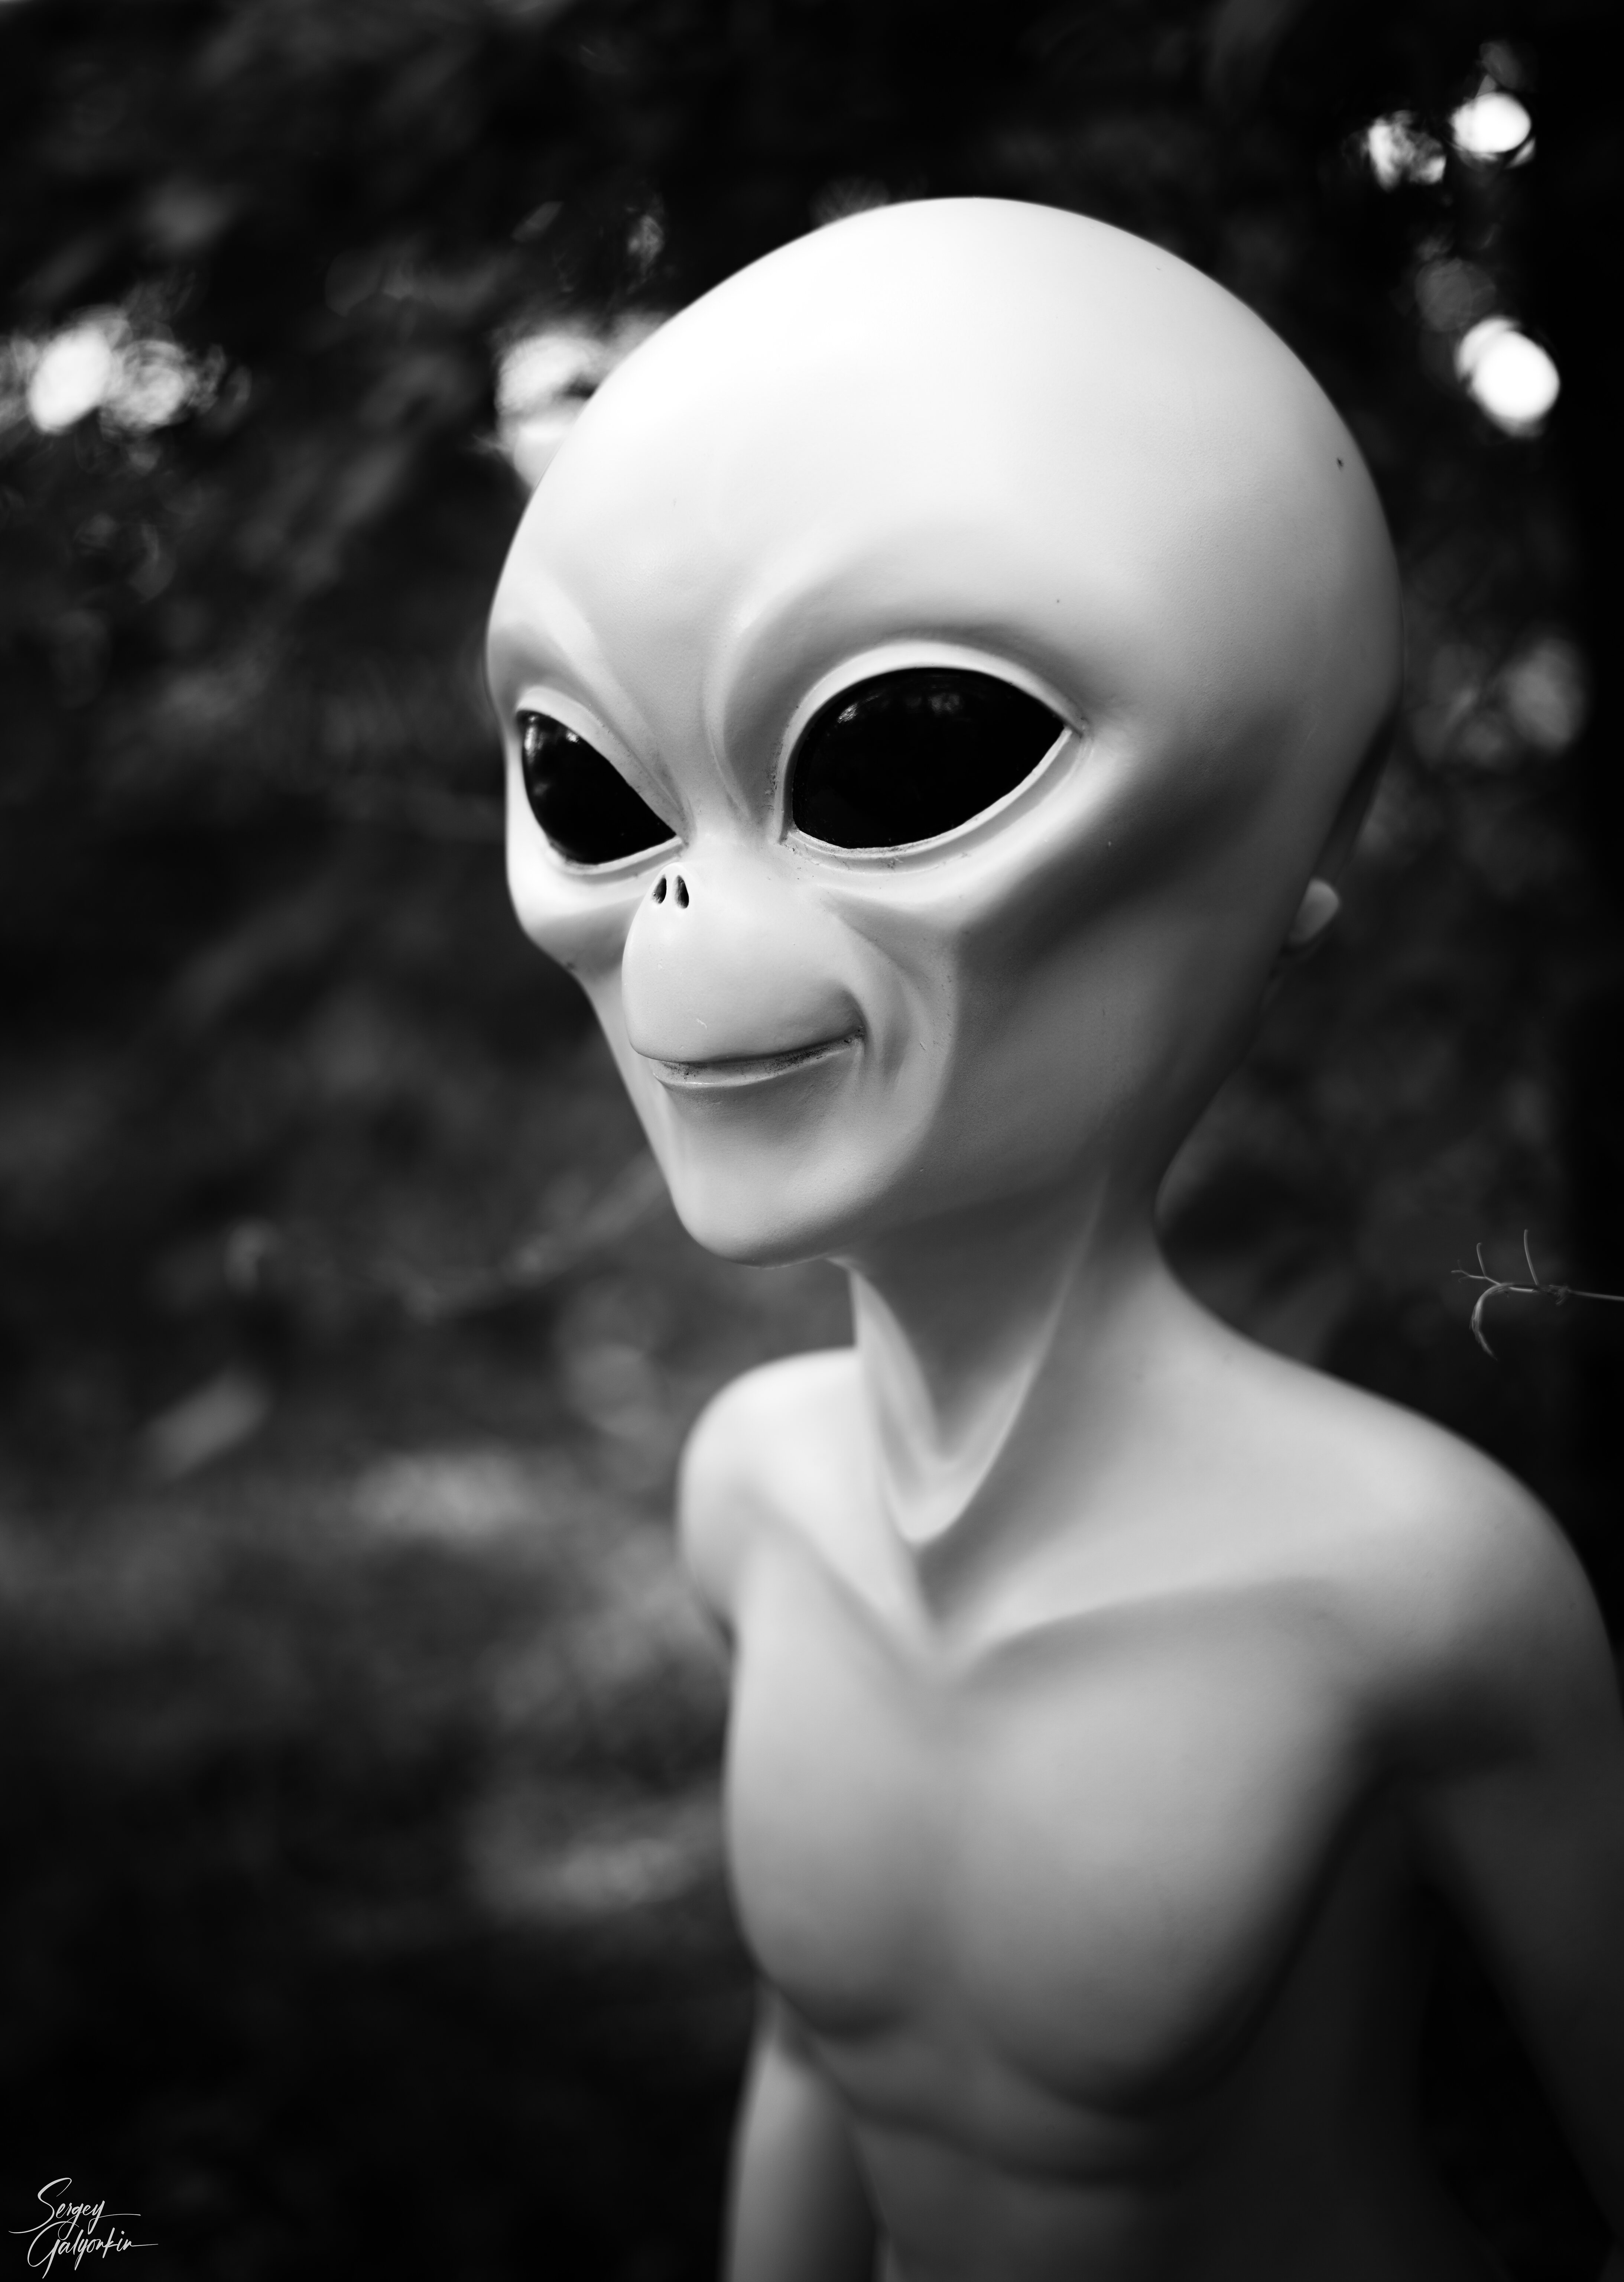 Download wallpaper 4372x6143 alien, eyes, black and white hd background